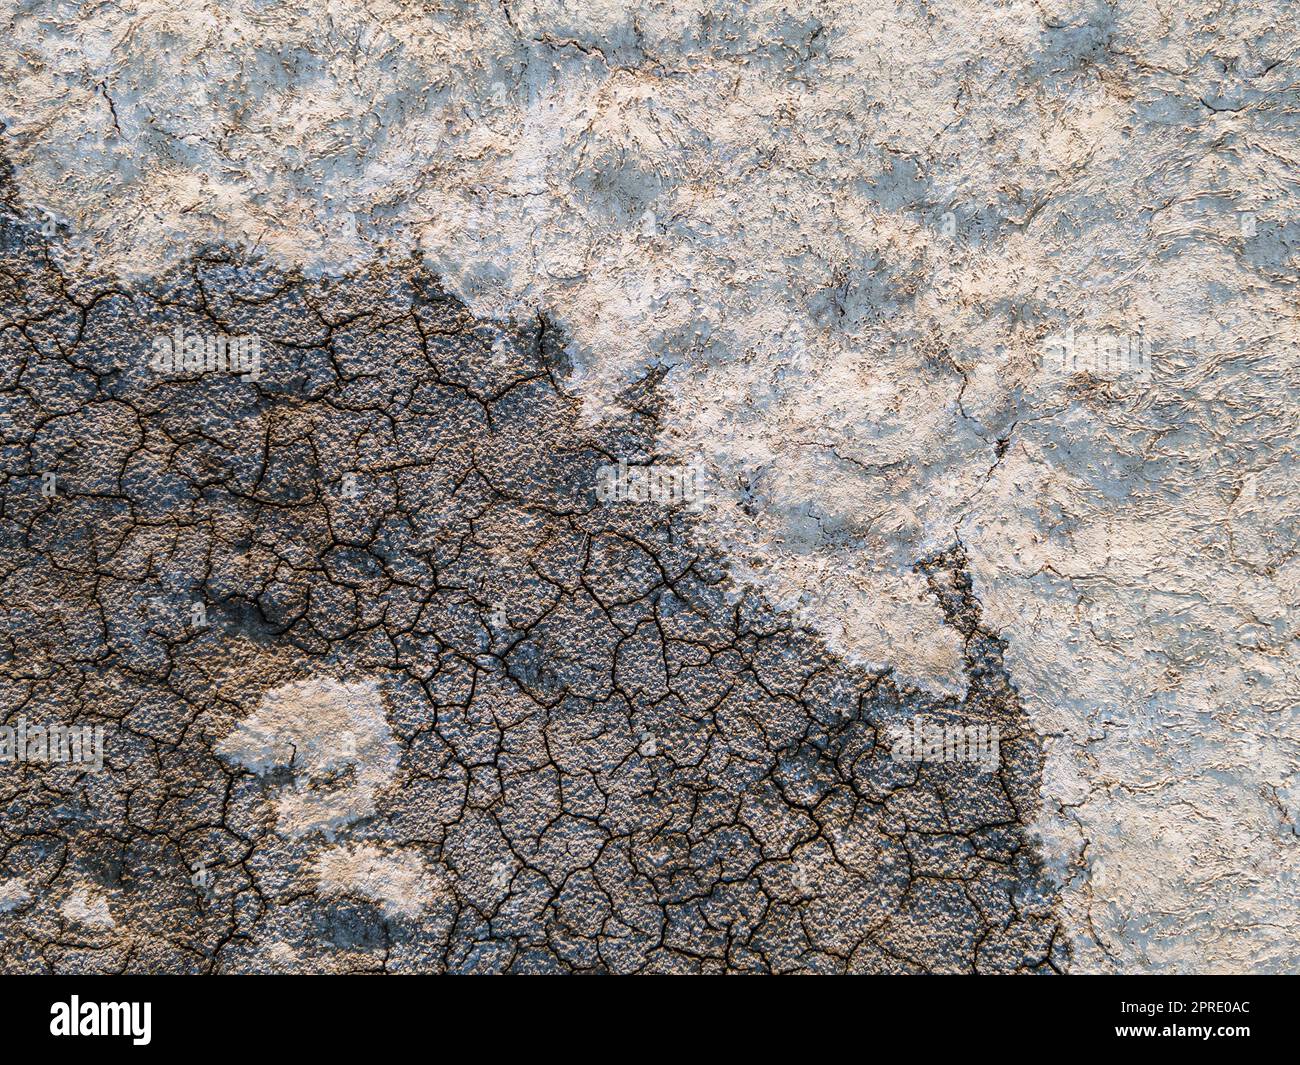 Geology.Dried-up riverbeds and lakes. Drought, global warming and climate change. Cracked dry earth and soil.Dry desert, drought season. Idea concept symbol disaster ecology in nature. Stock Photo